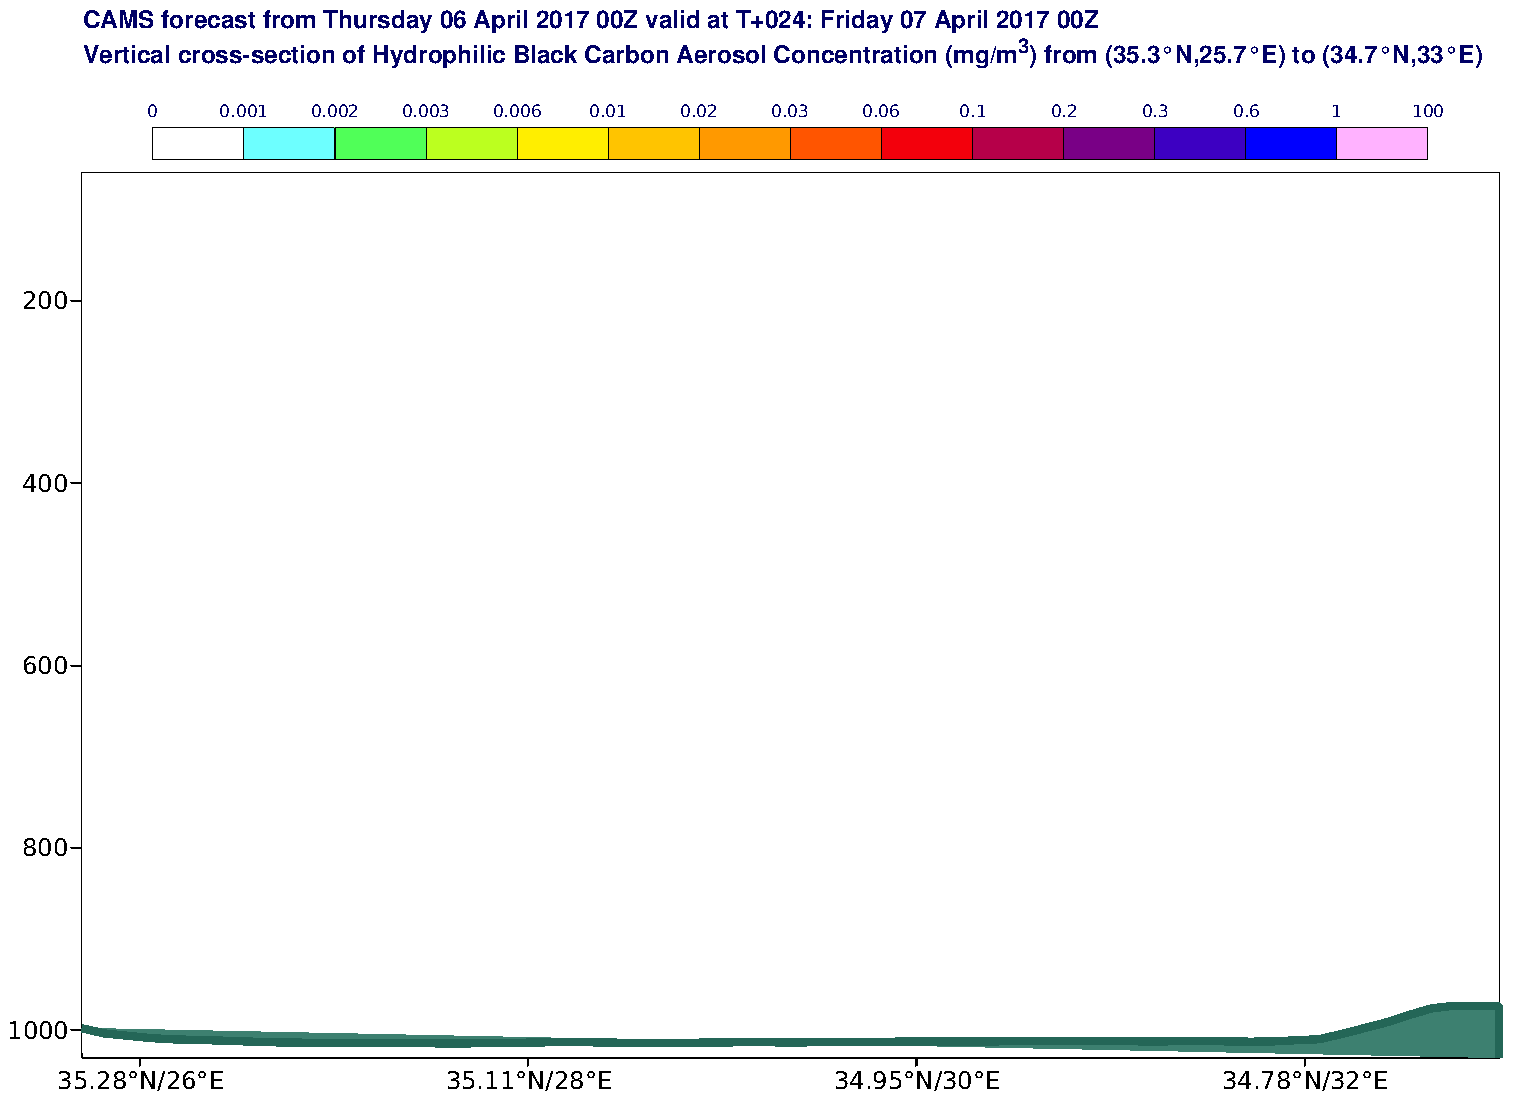 Vertical cross-section of Hydrophilic Black Carbon Aerosol Concentration (mg/m3) valid at T24 - 2017-04-07 00:00